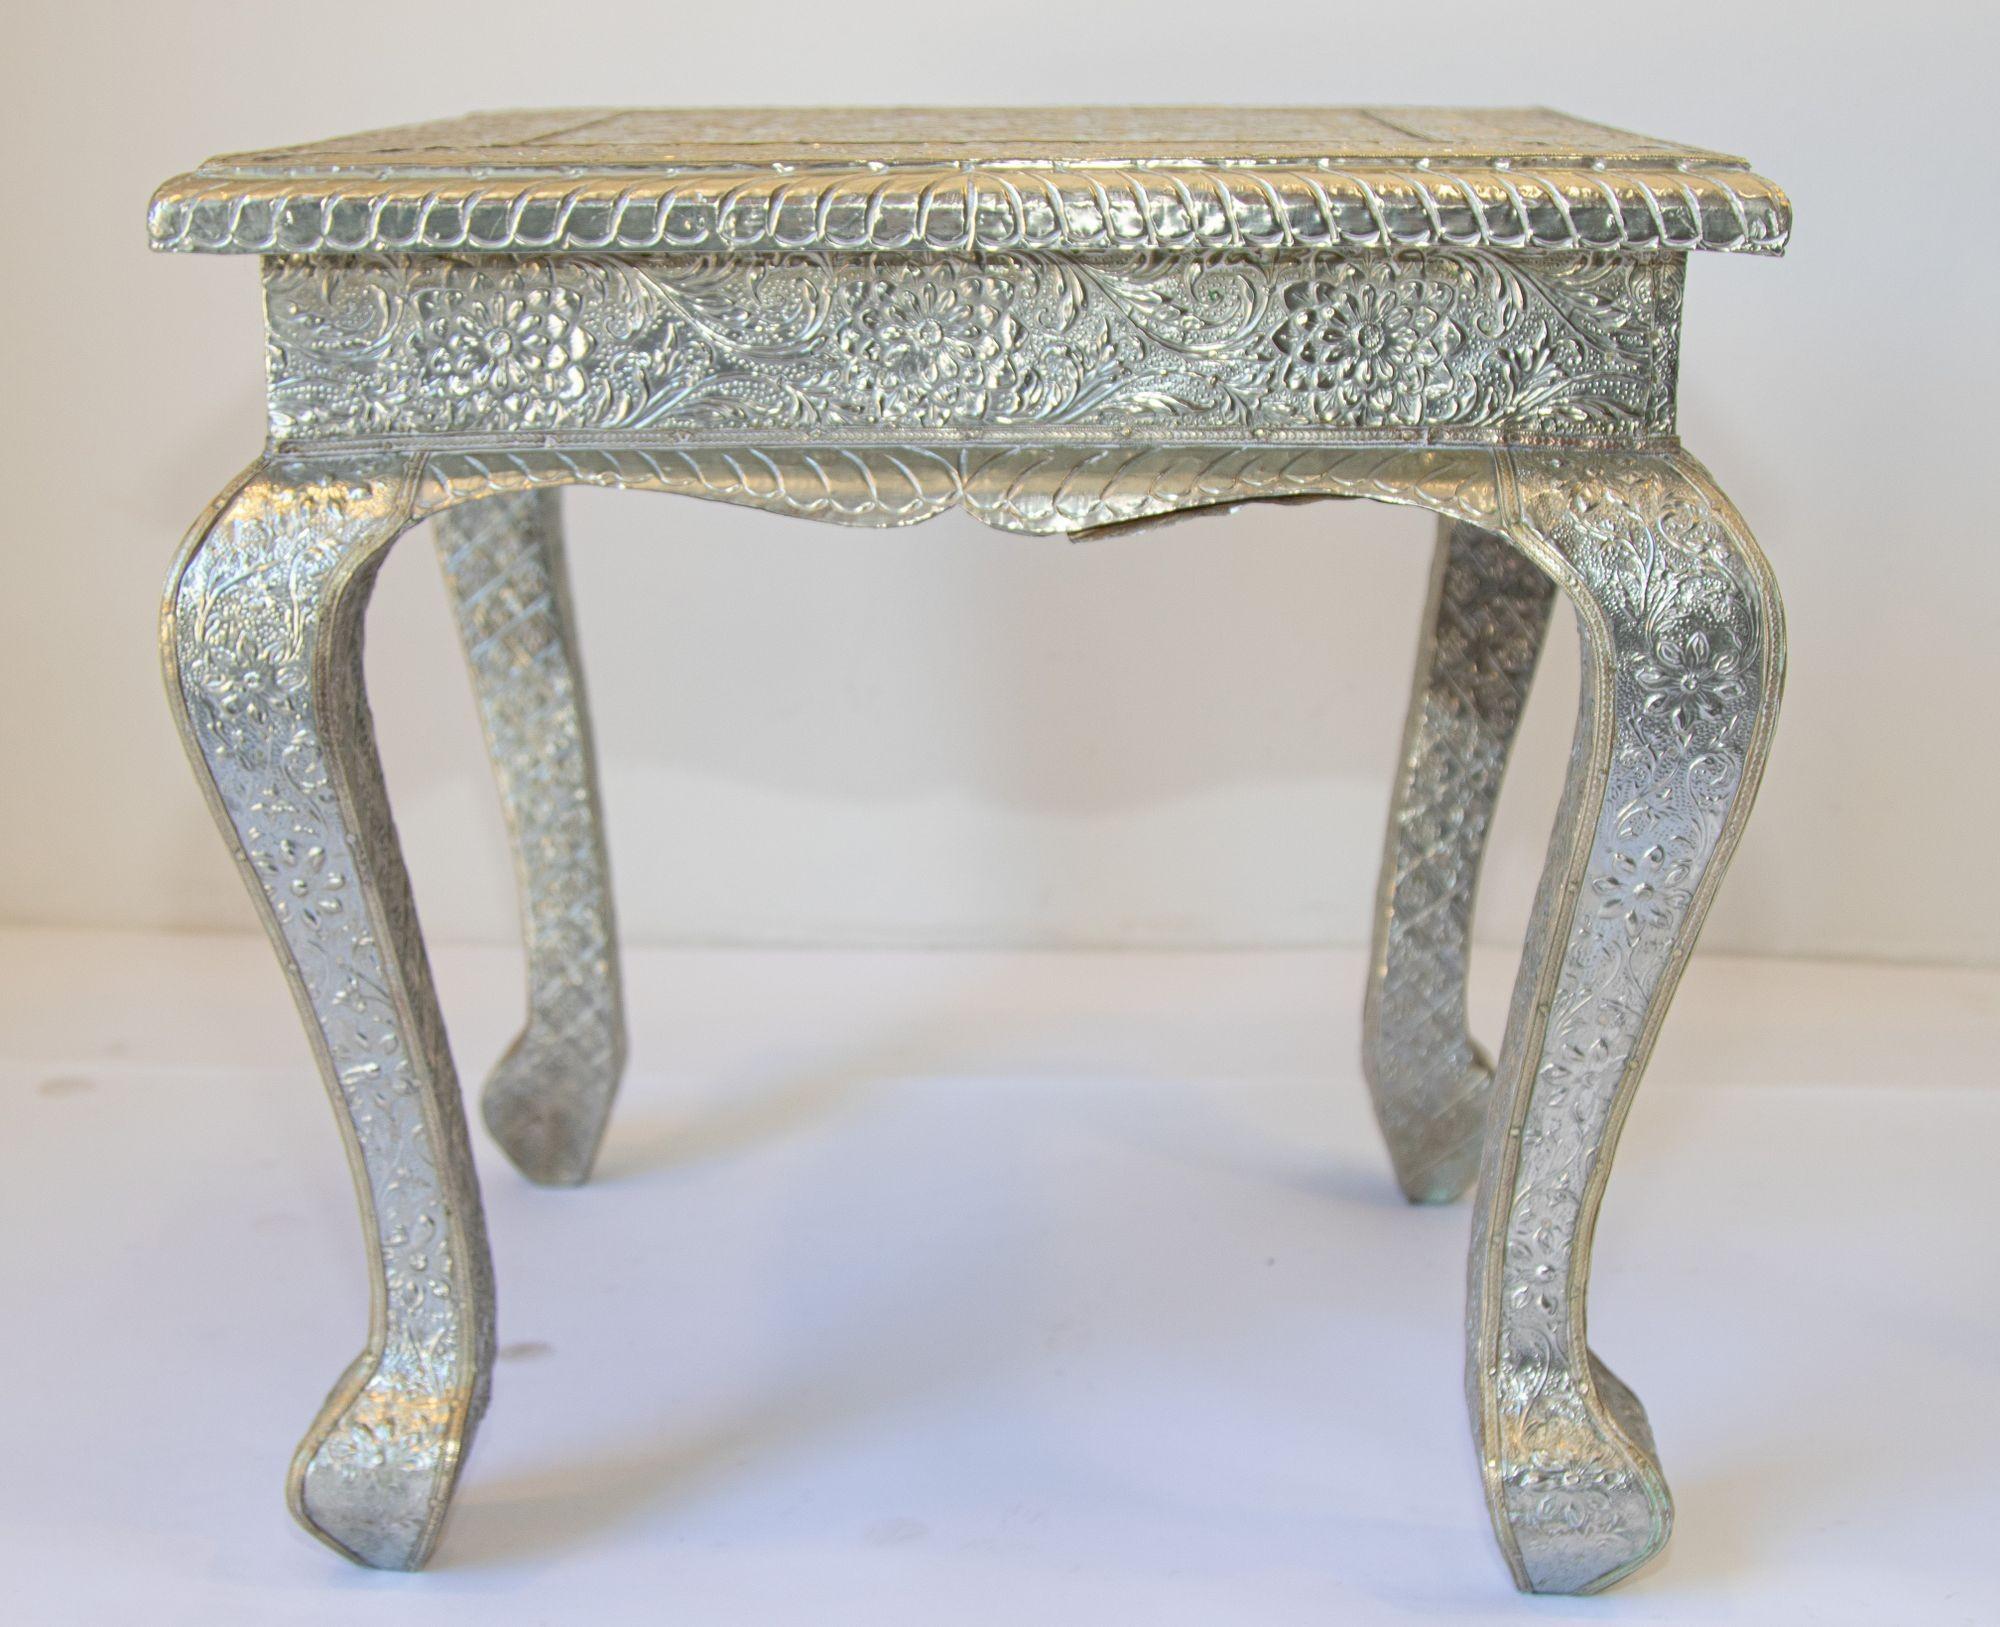 Vintage Anglo-Indian silvered wrapped clad side low table. Anglo Raj side low table hand-hammered with repousse silver metal work over wood very nice and unusual. Great vintage Anglo-Indian silver metal clad square table. This versatile table can be